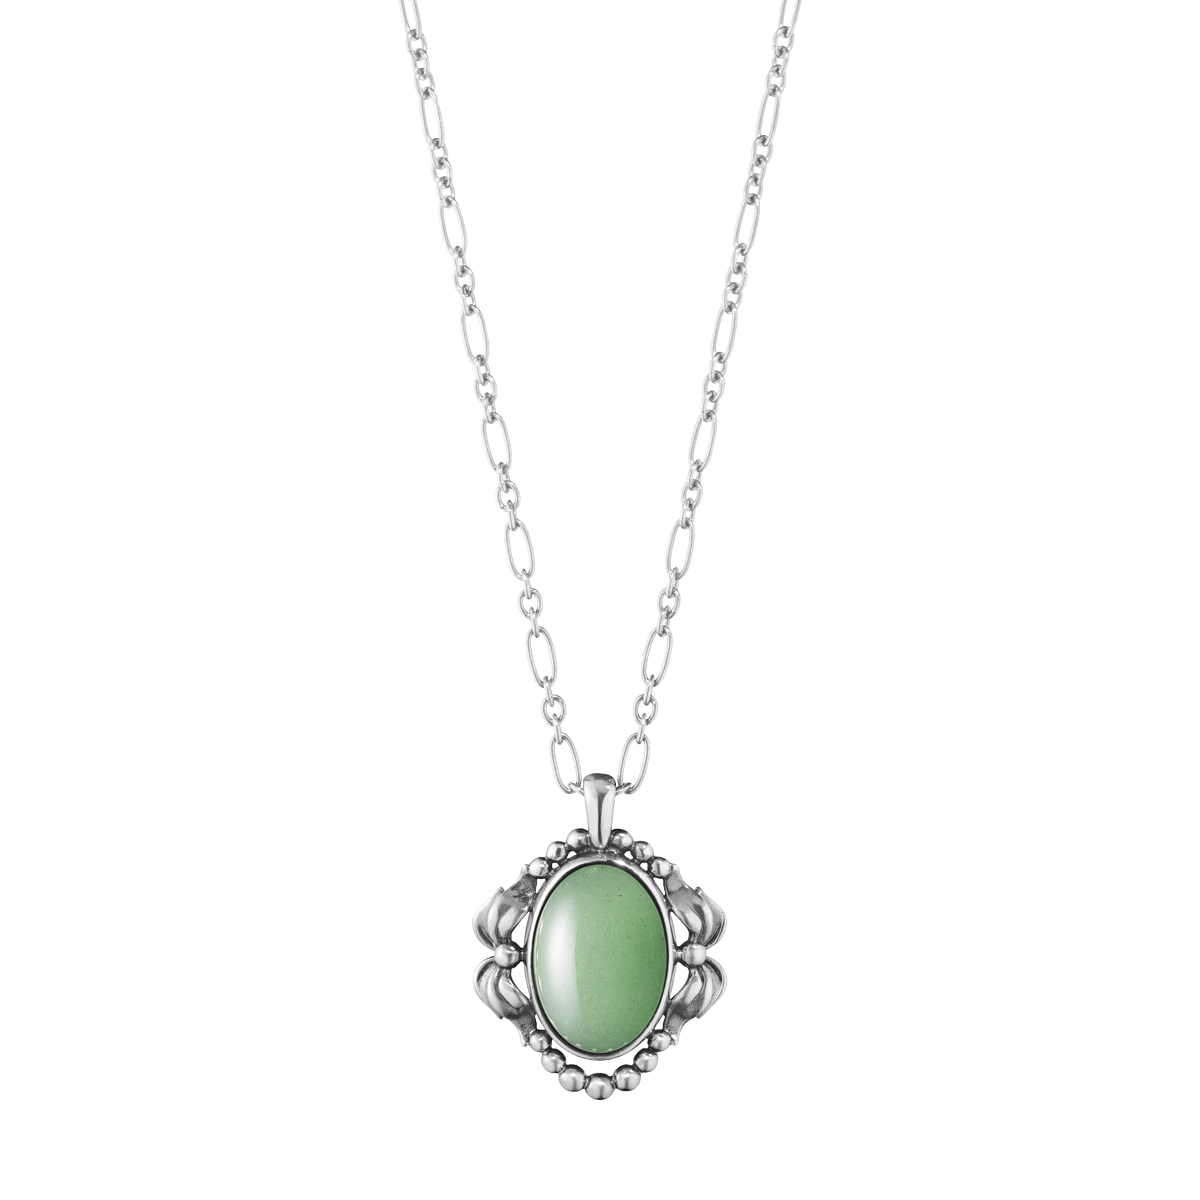 2022 HERITAGE Pendant in oxidised sterling silver and green aventurine